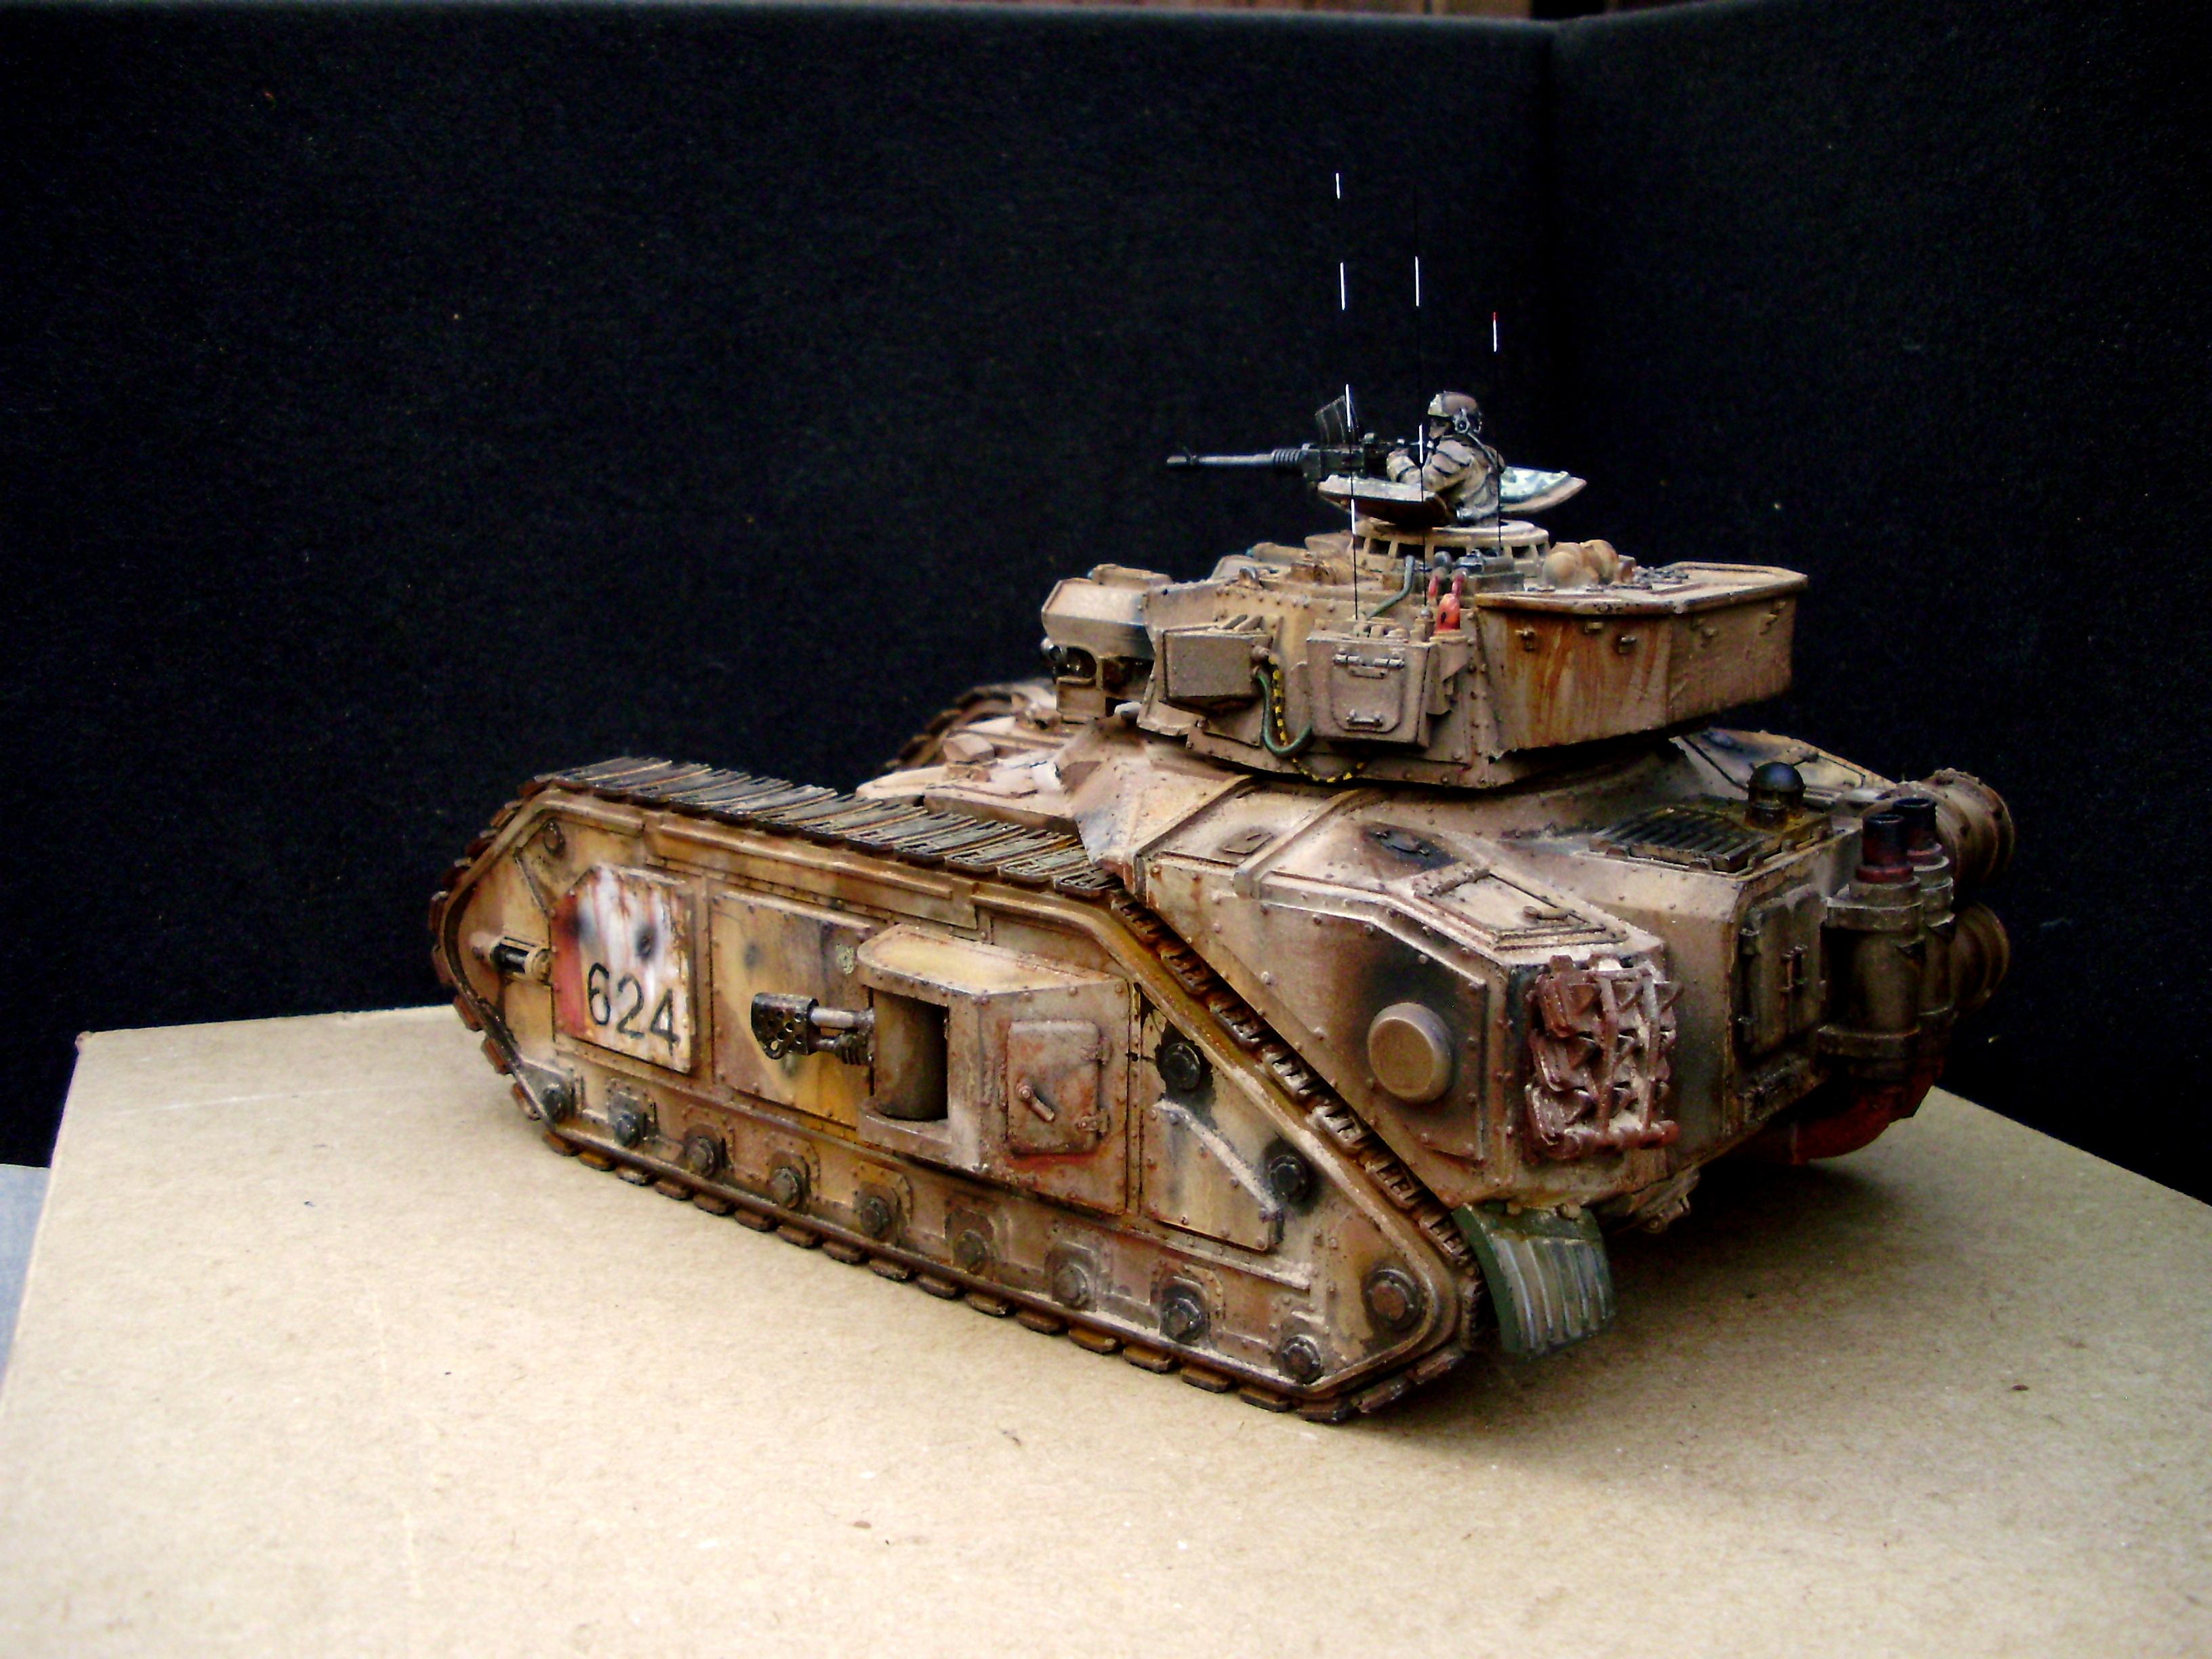 Death Korps of Krieg, Forge World, Imperial Guard, Imperial Guard Tanks, Krieg Macharius, Krieg Macharius Vulcan, Macharius, Macharius Vulcan, Tank